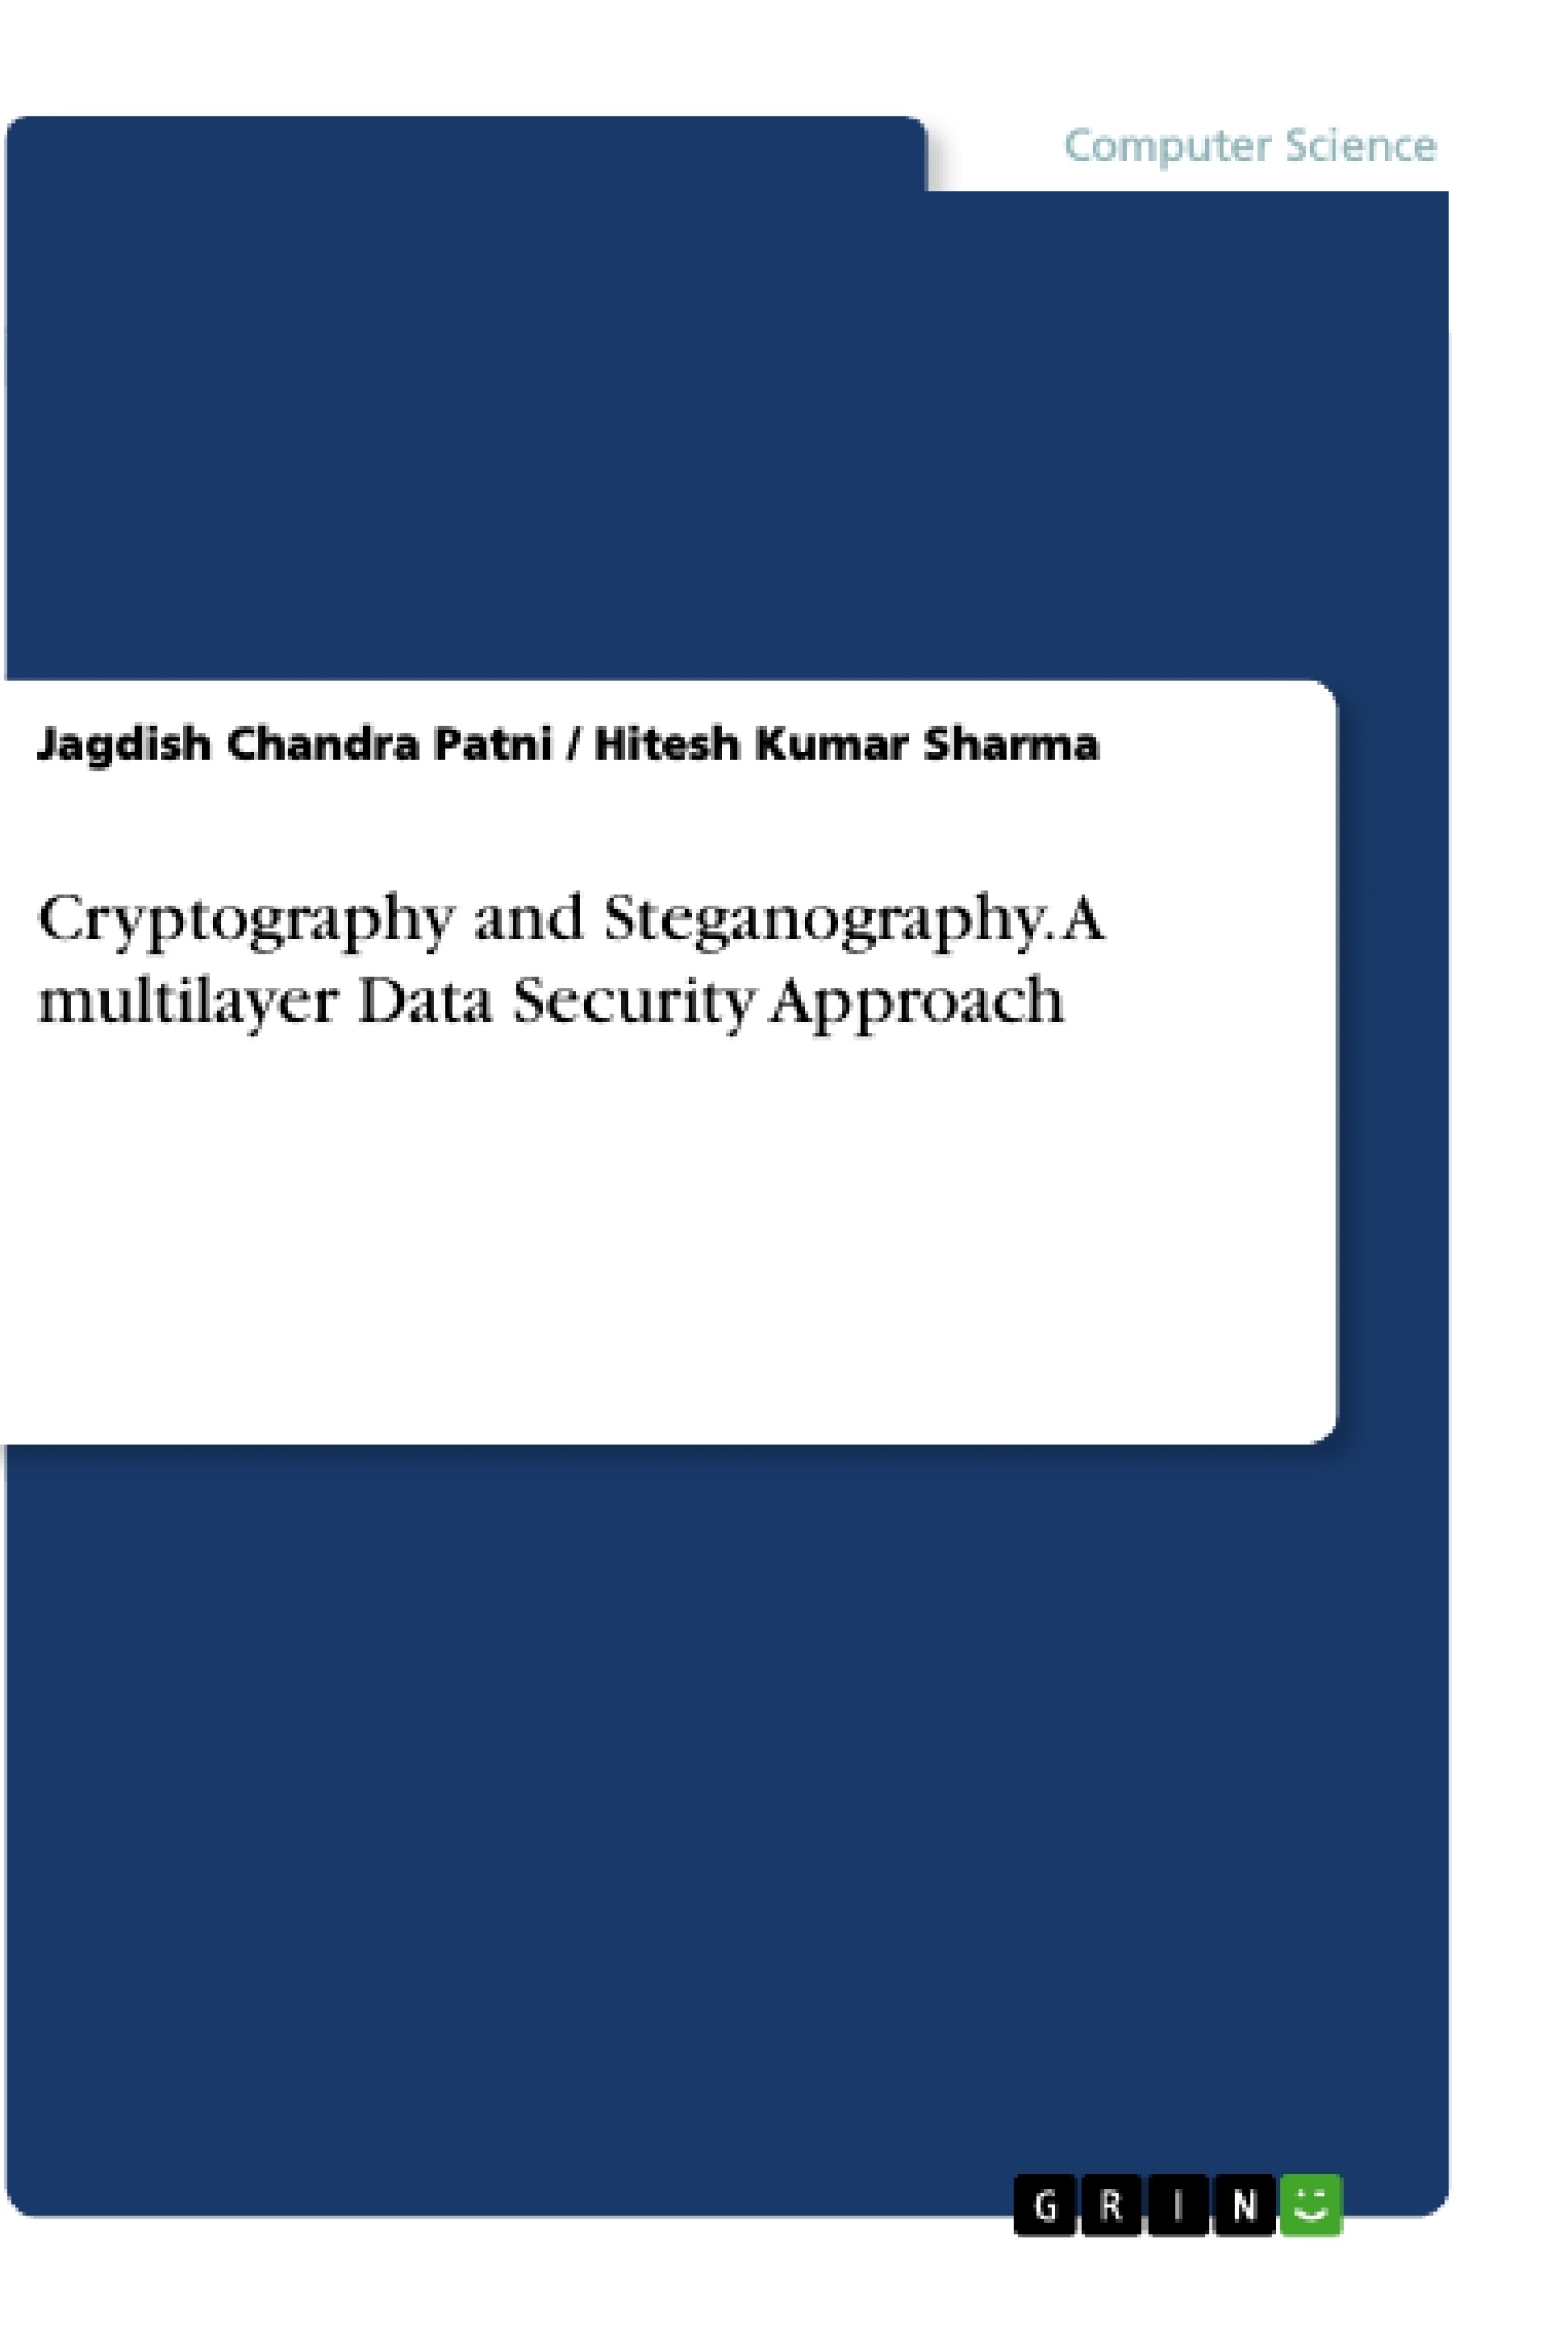 Título: Cryptography and Steganography. A multilayer Data Security Approach